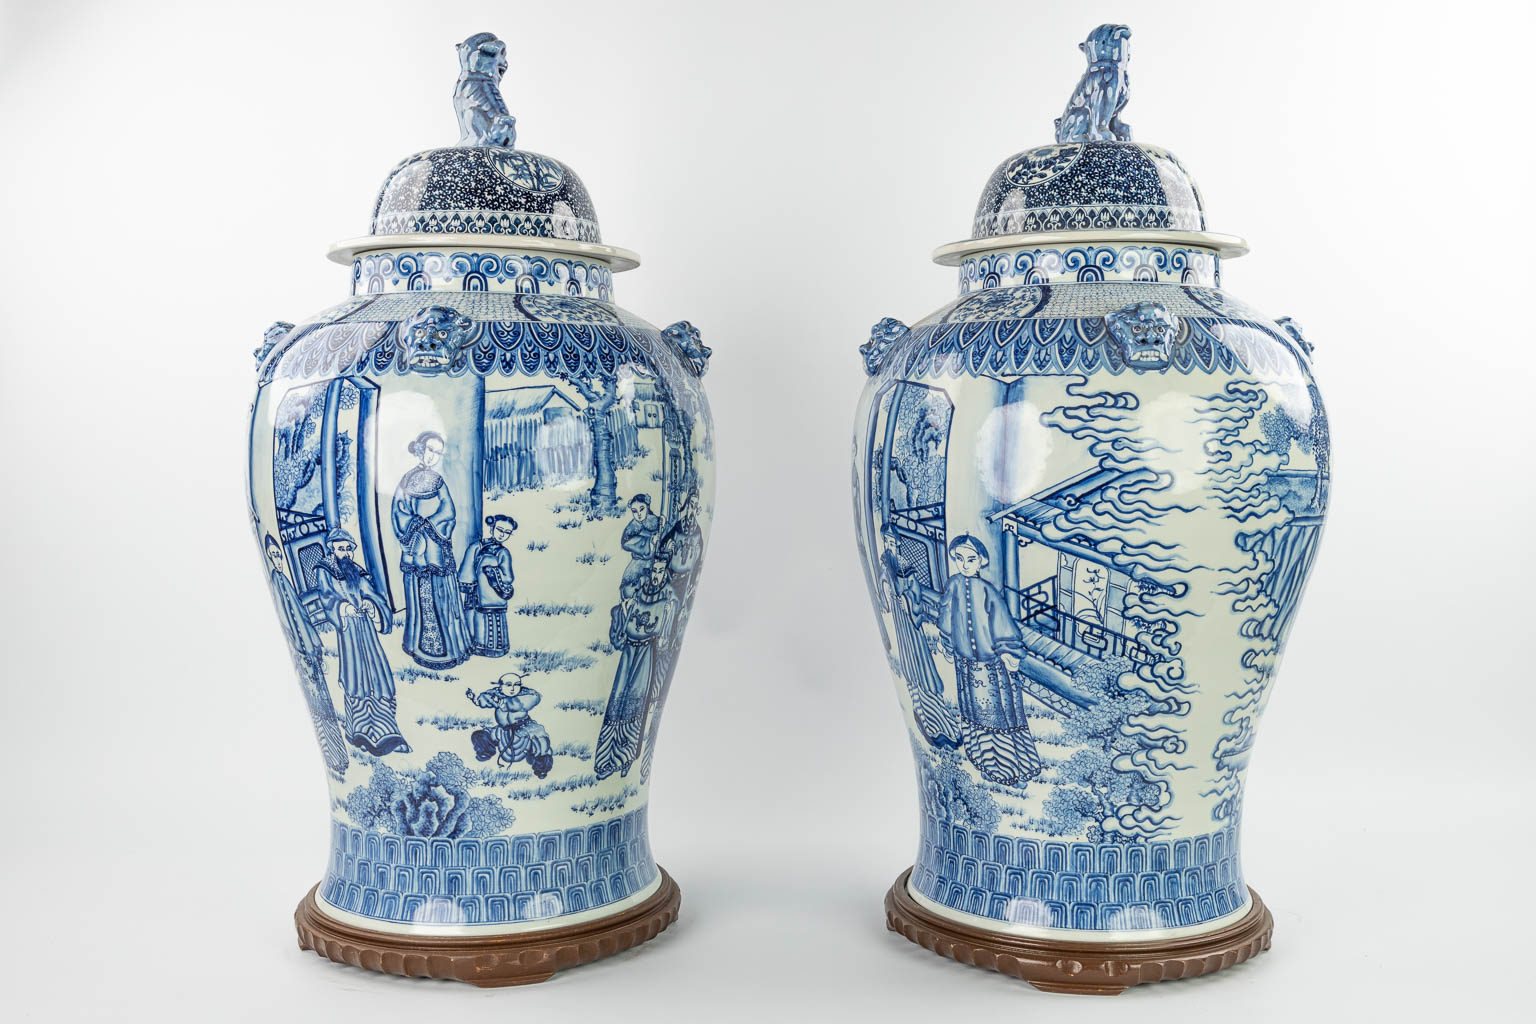 A pair of large Chinese vases with lid, made of blue-white porcelain with the emperor, dragons and w - Image 14 of 15